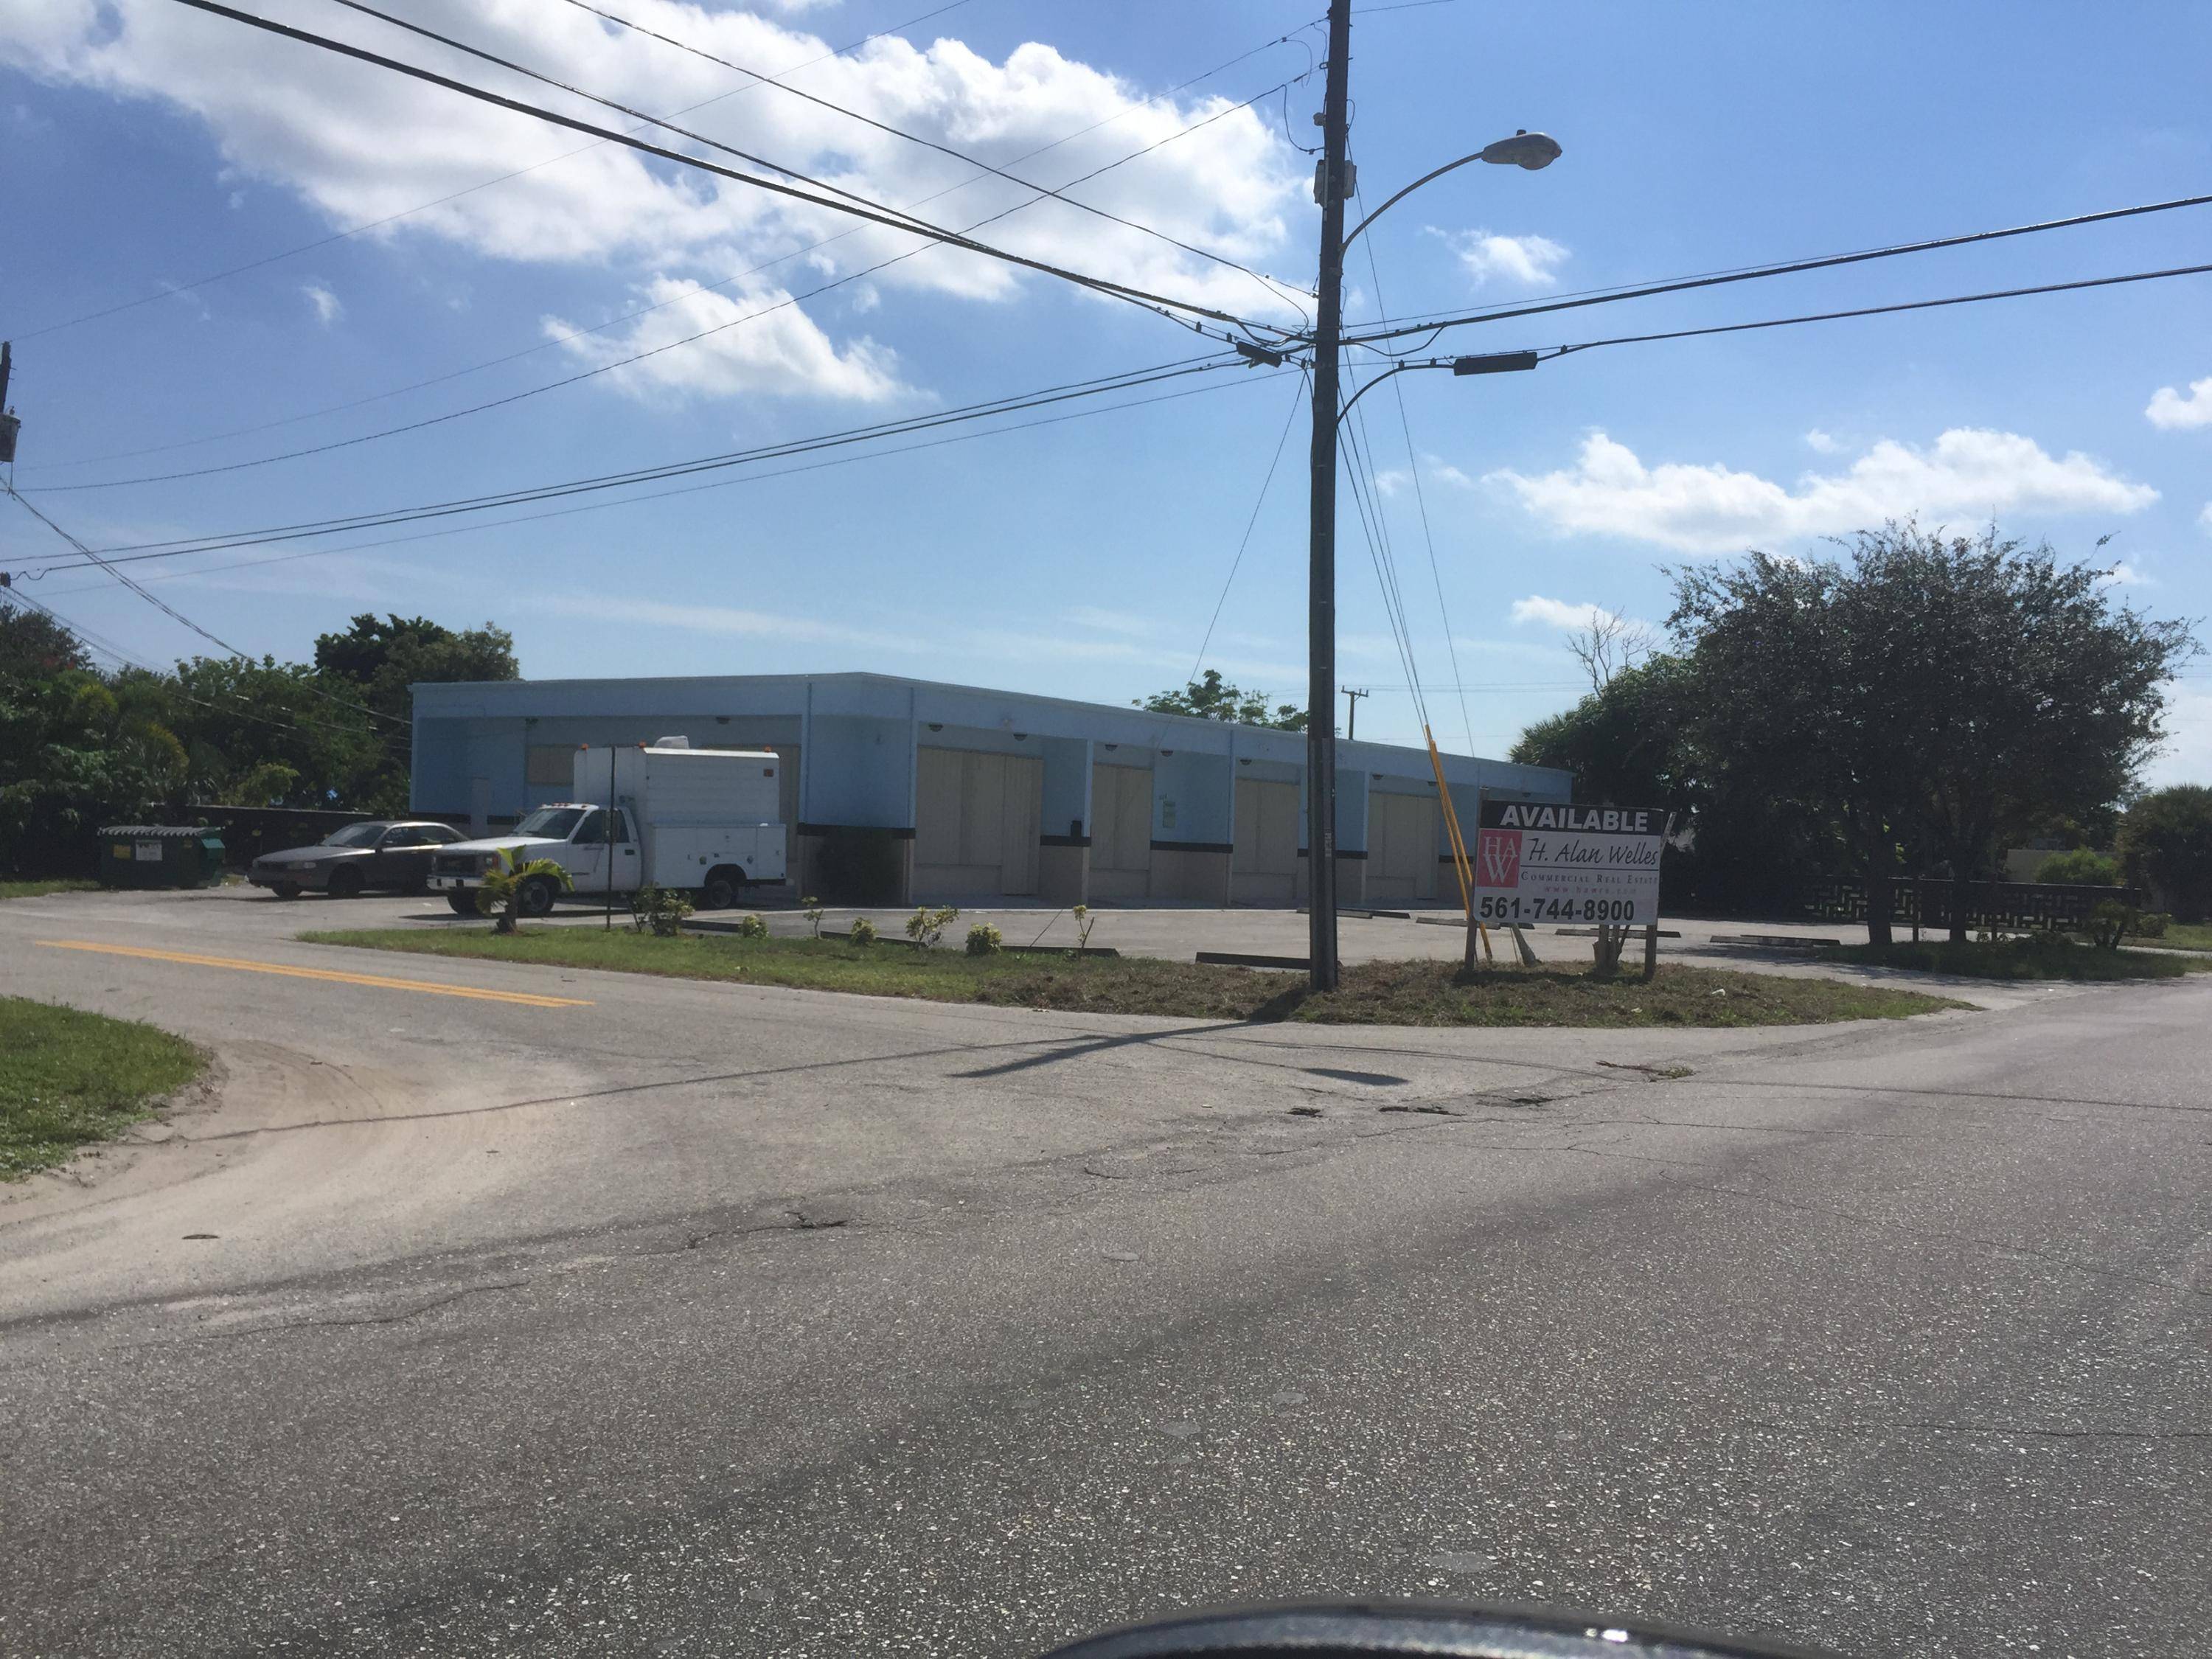 1 860 sf unit for lease 1100 moENDCAP UNIT WITH LOTS OF WINDOWS AND ACCORDIAN HURRICANE SECURUTY SHUTTERSor entire building for sale ; Owner will only entertain a full ask ...